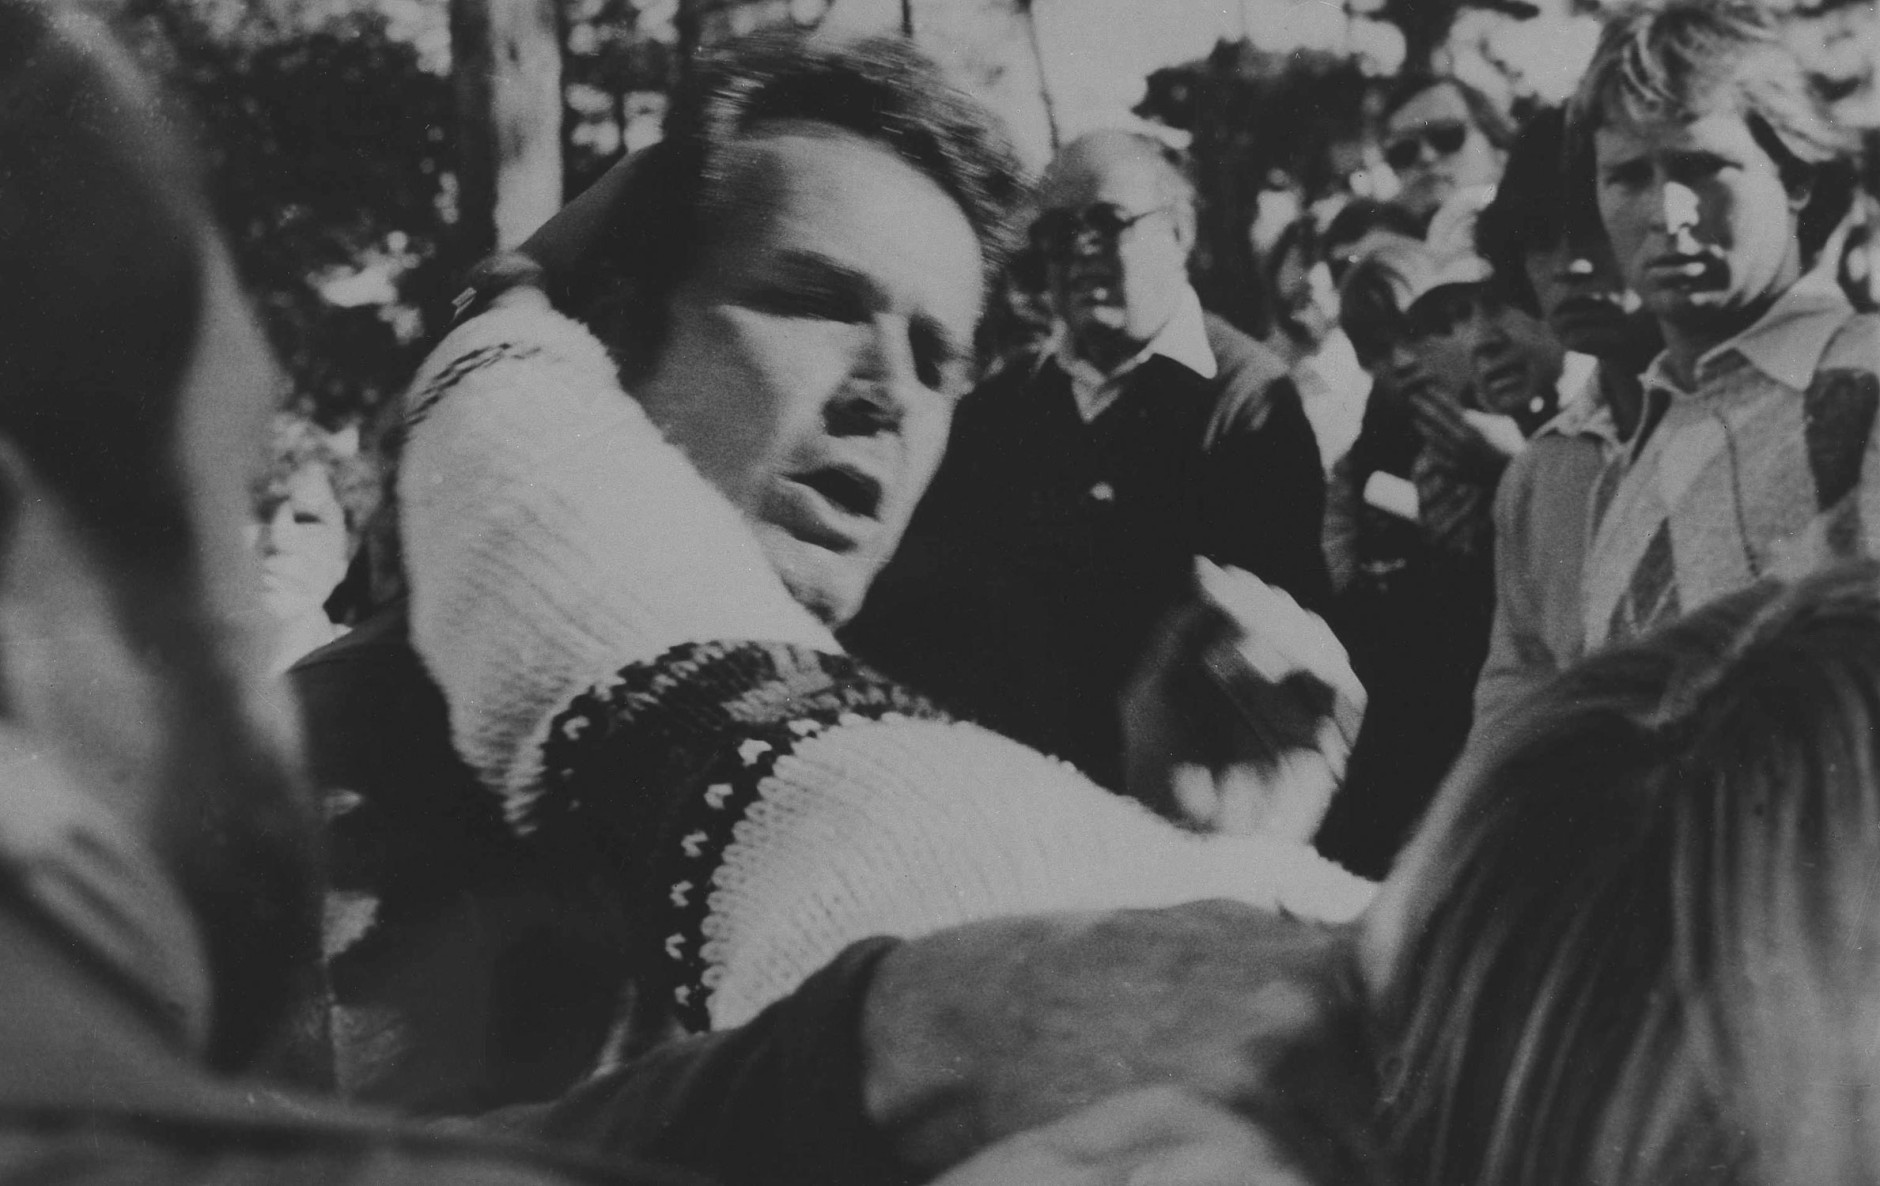 The event has had its share of drama, like this tussle between James Garner and a fan in 1981. (AP Photo/C. Peterson)